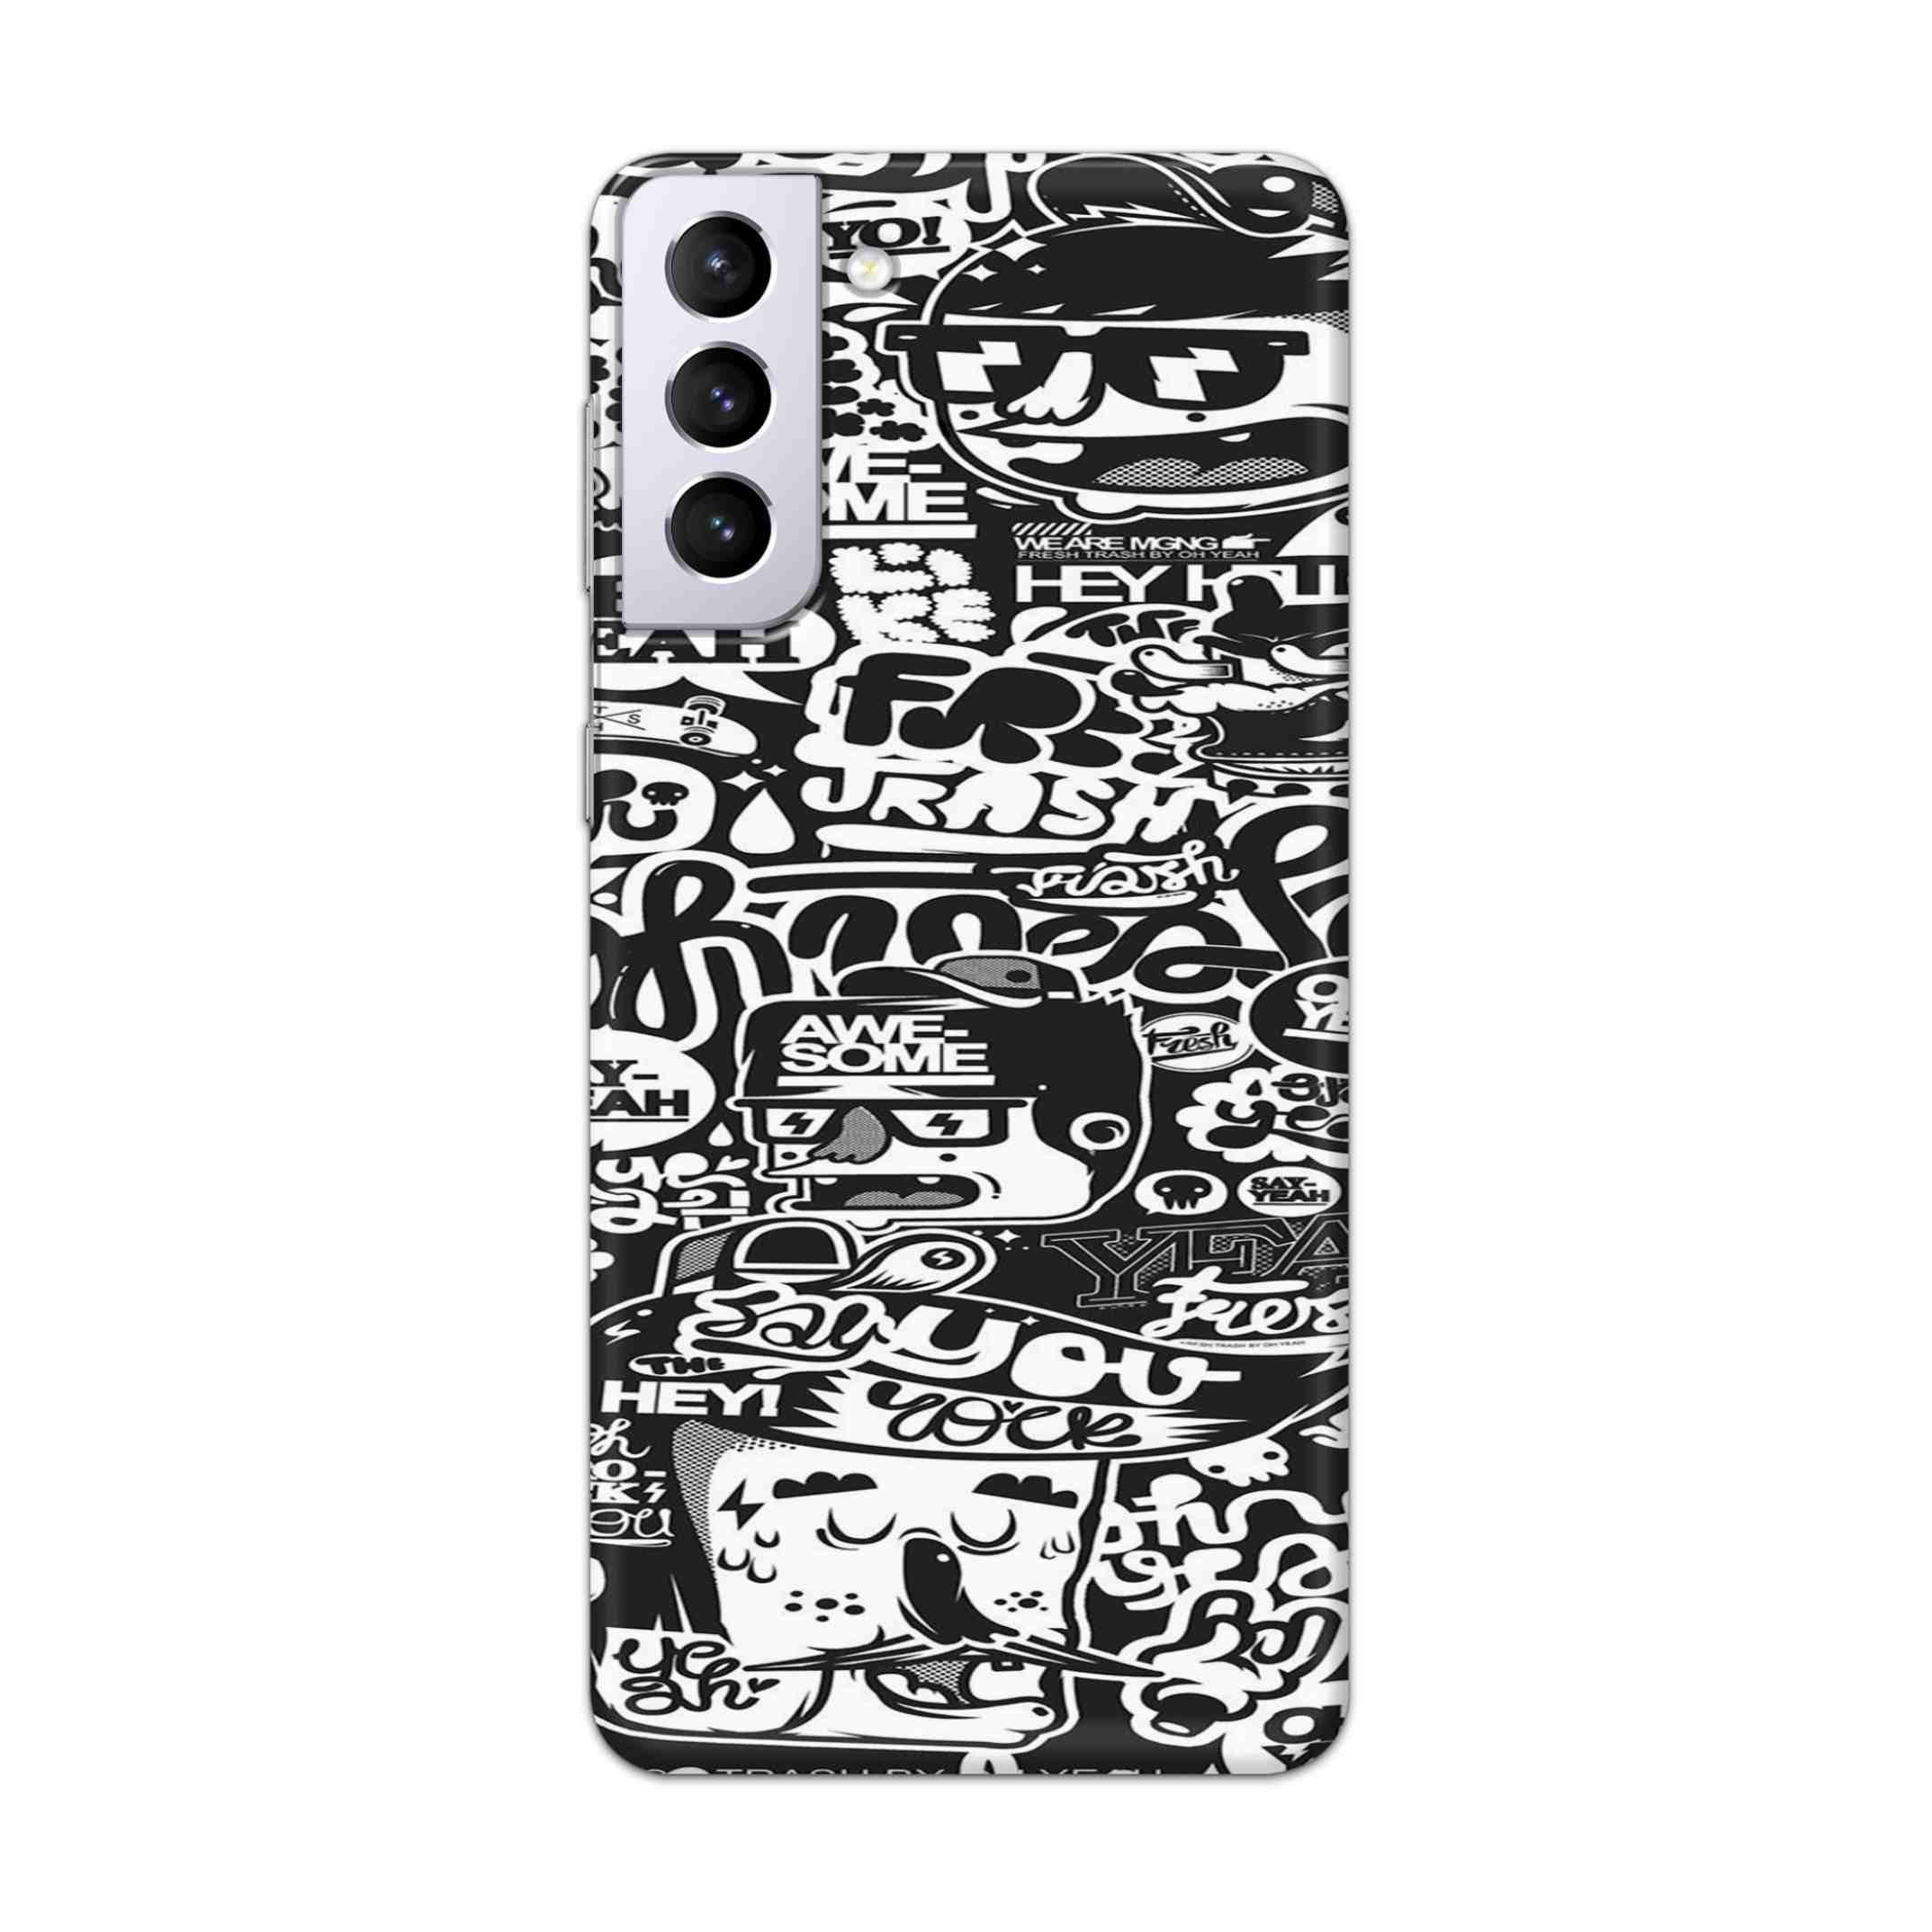 Buy Awesome Hard Back Mobile Phone Case Cover For Samsung Galaxy S21 Online